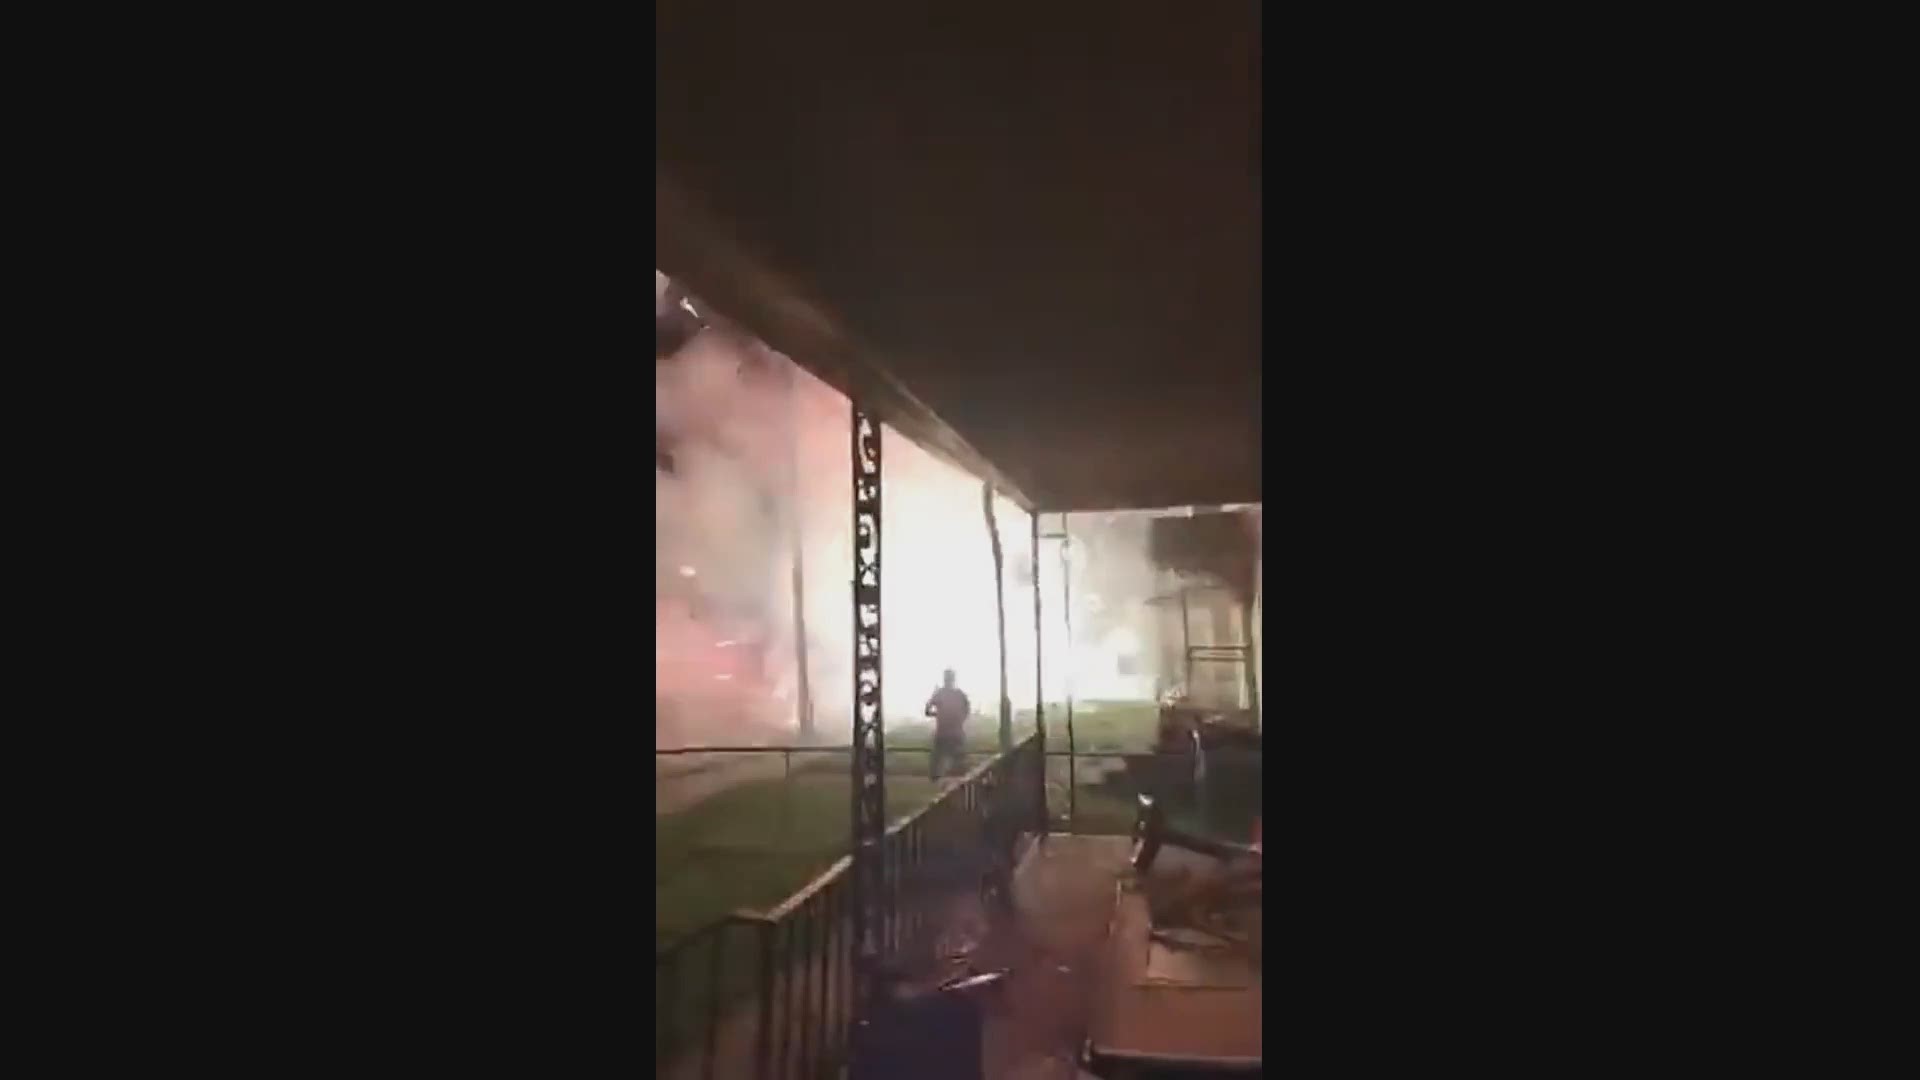 Three people were injured after a U-Haul truck loaded with fireworks caught fire in east Toledo on Sunday evening. (Video credit: Val McKee)